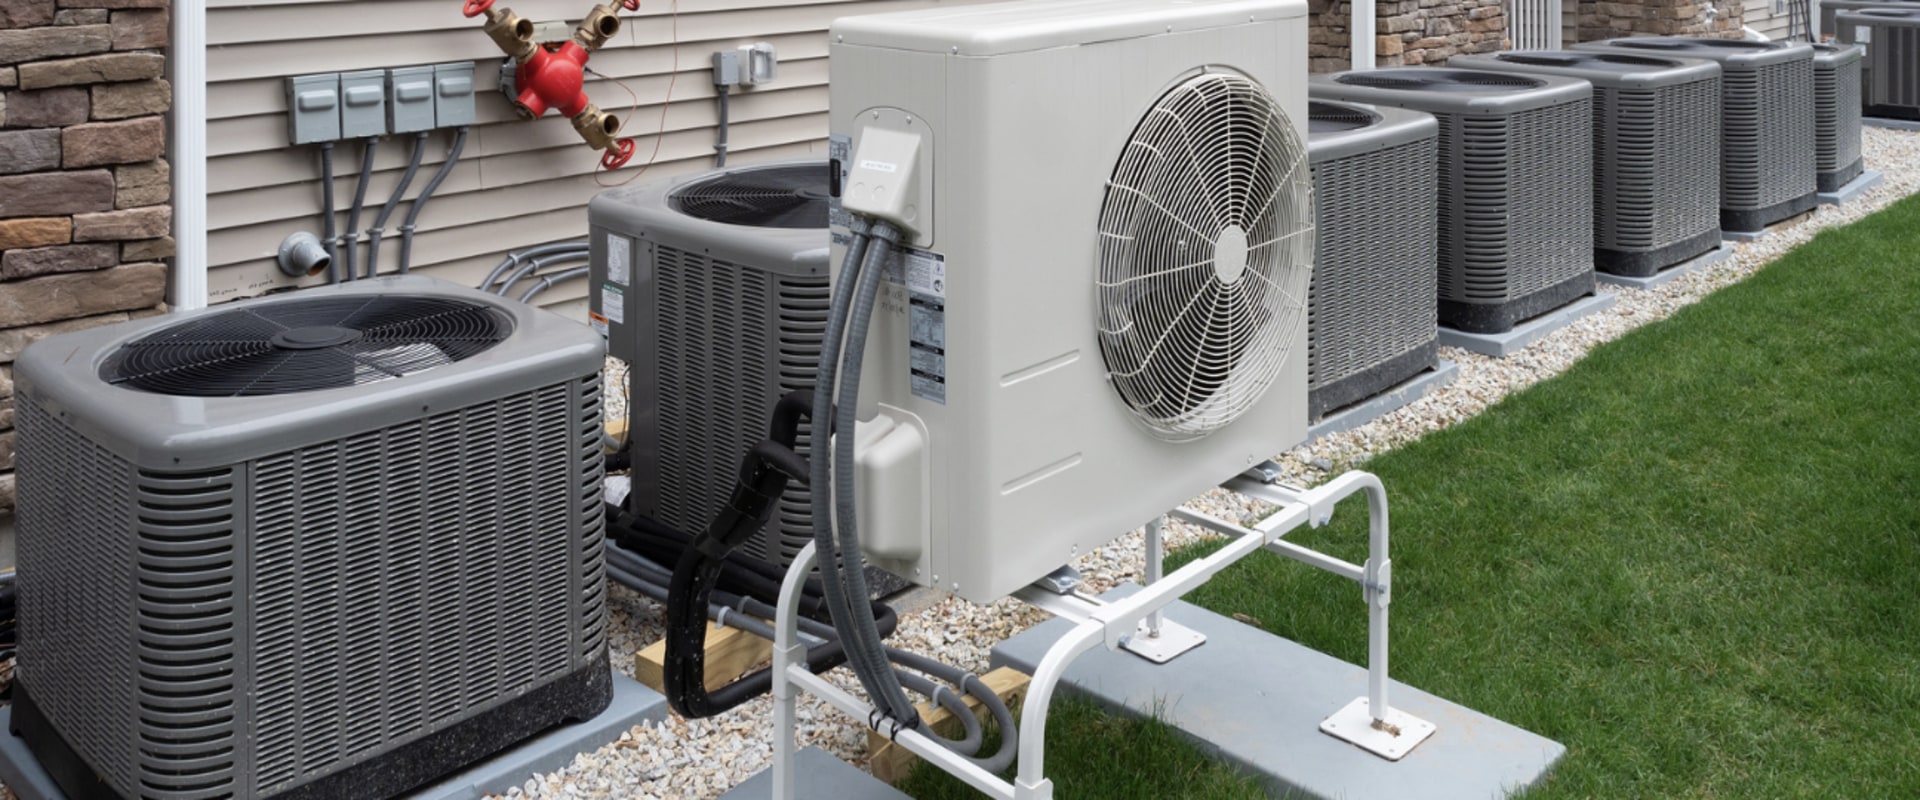 Affordable HVAC Air Conditioning Maintenance in Kendall FL